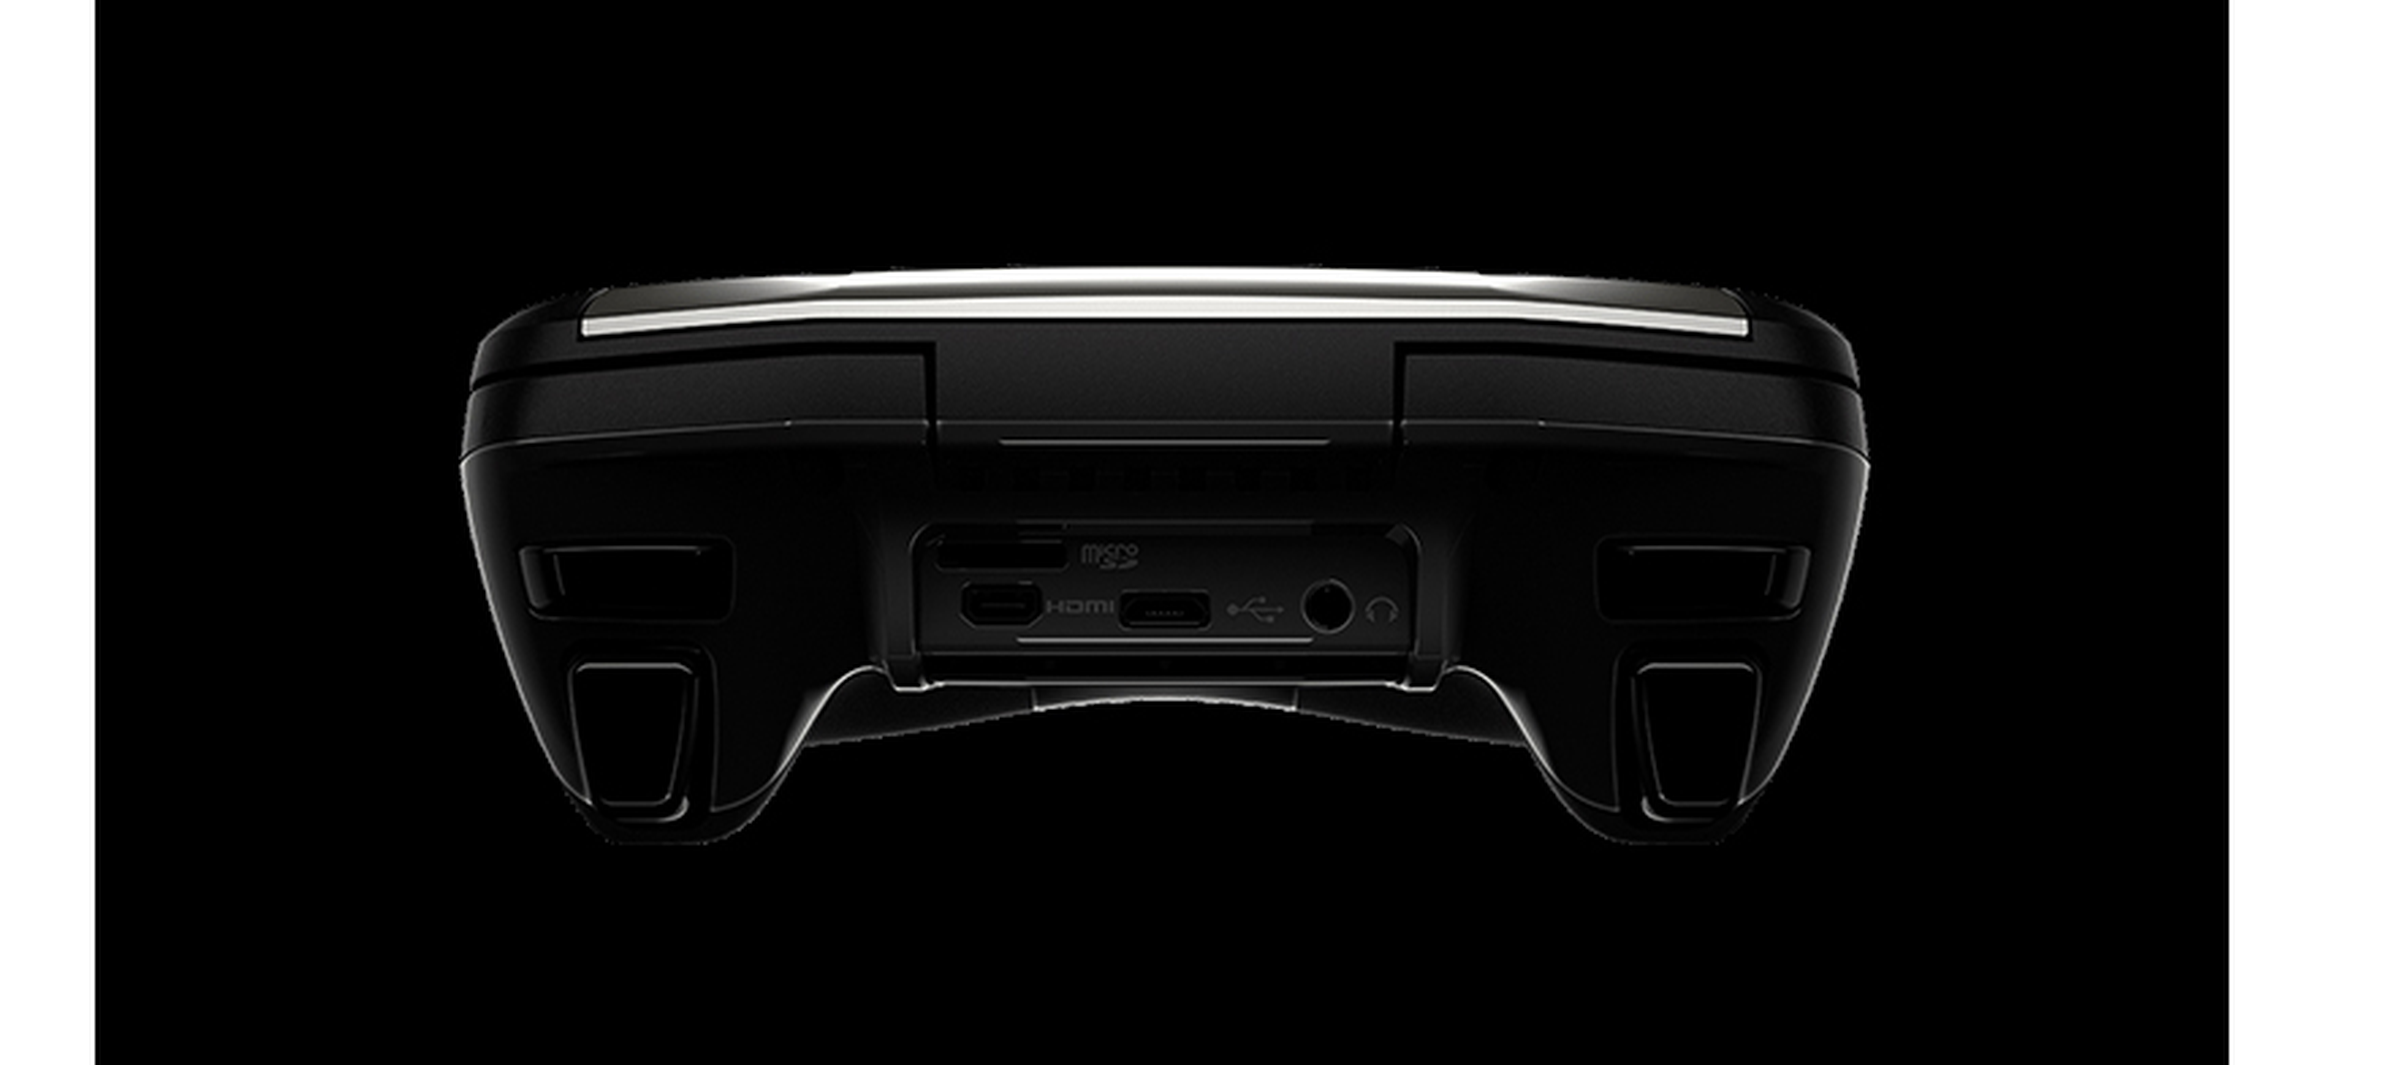 Nvidia Project Shield press pictures